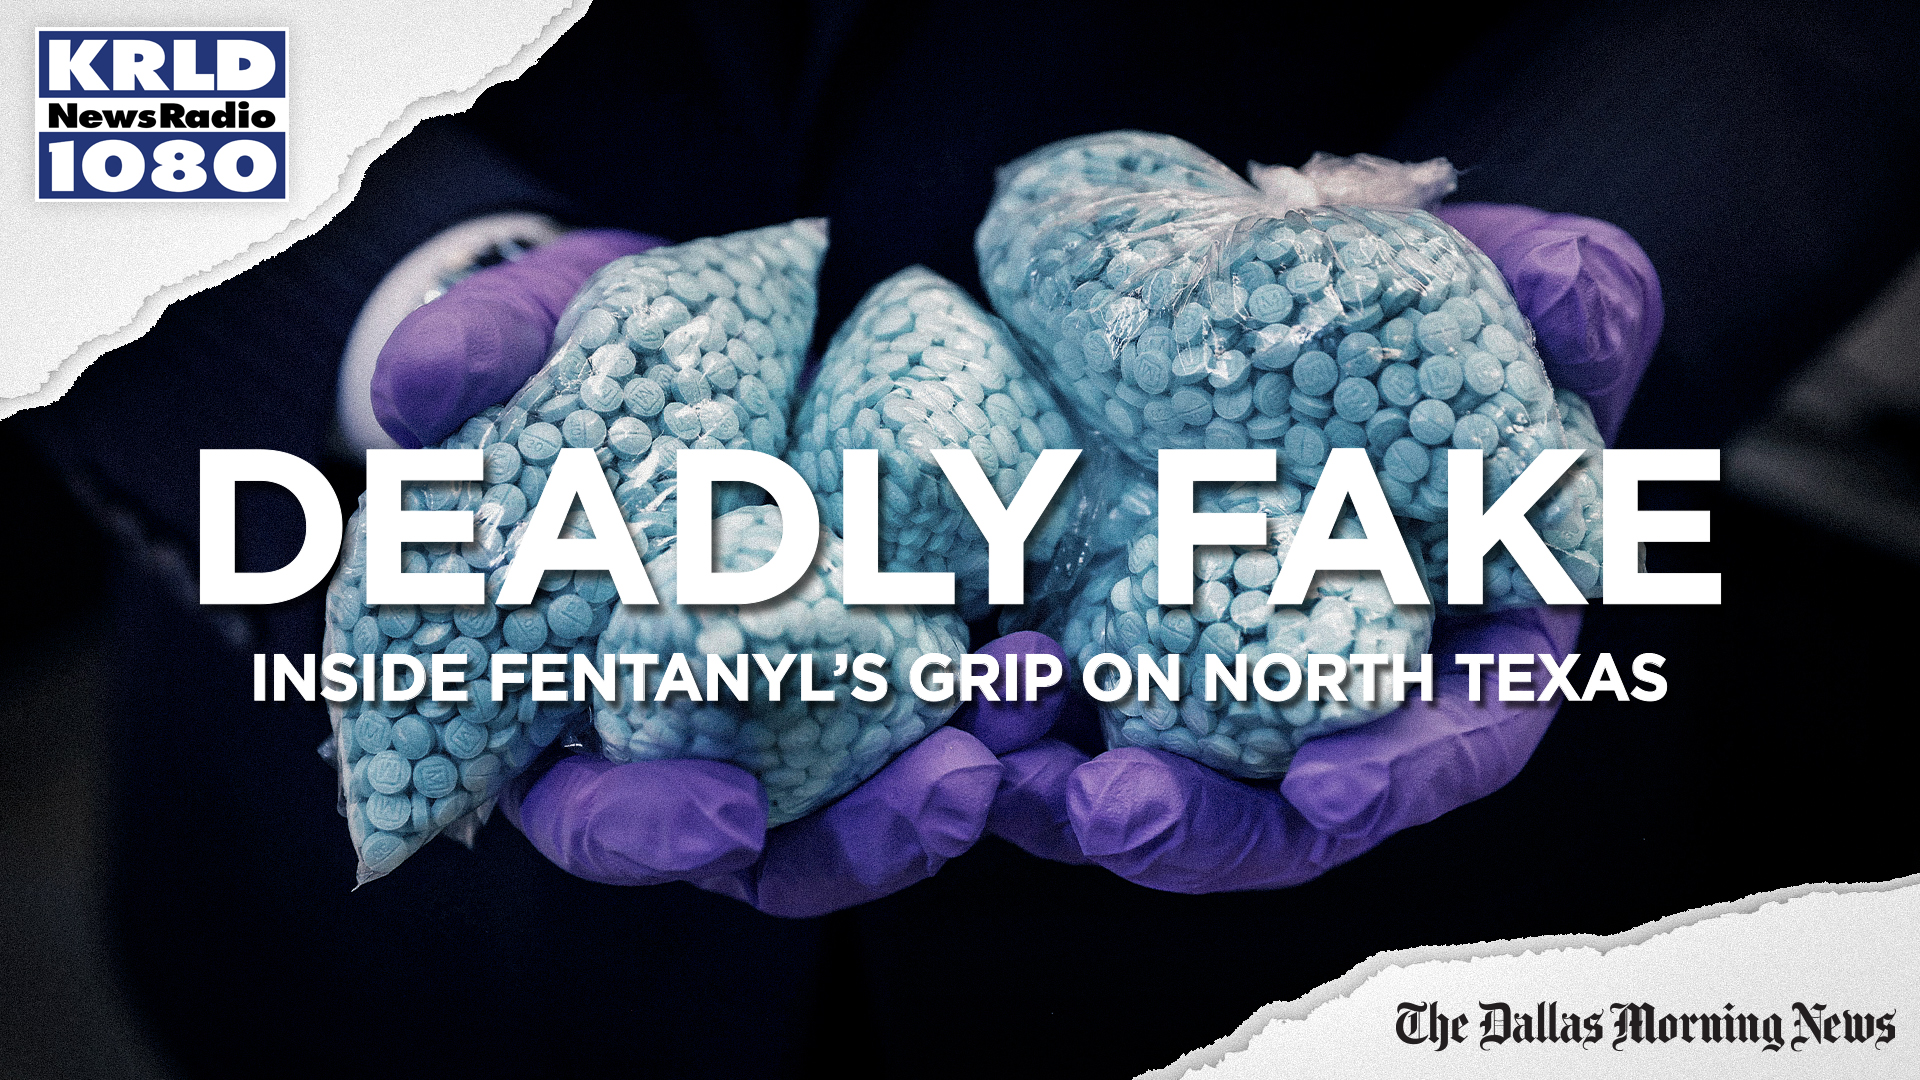 Deadly Fake: Inside fentanyl's grip on North Texas